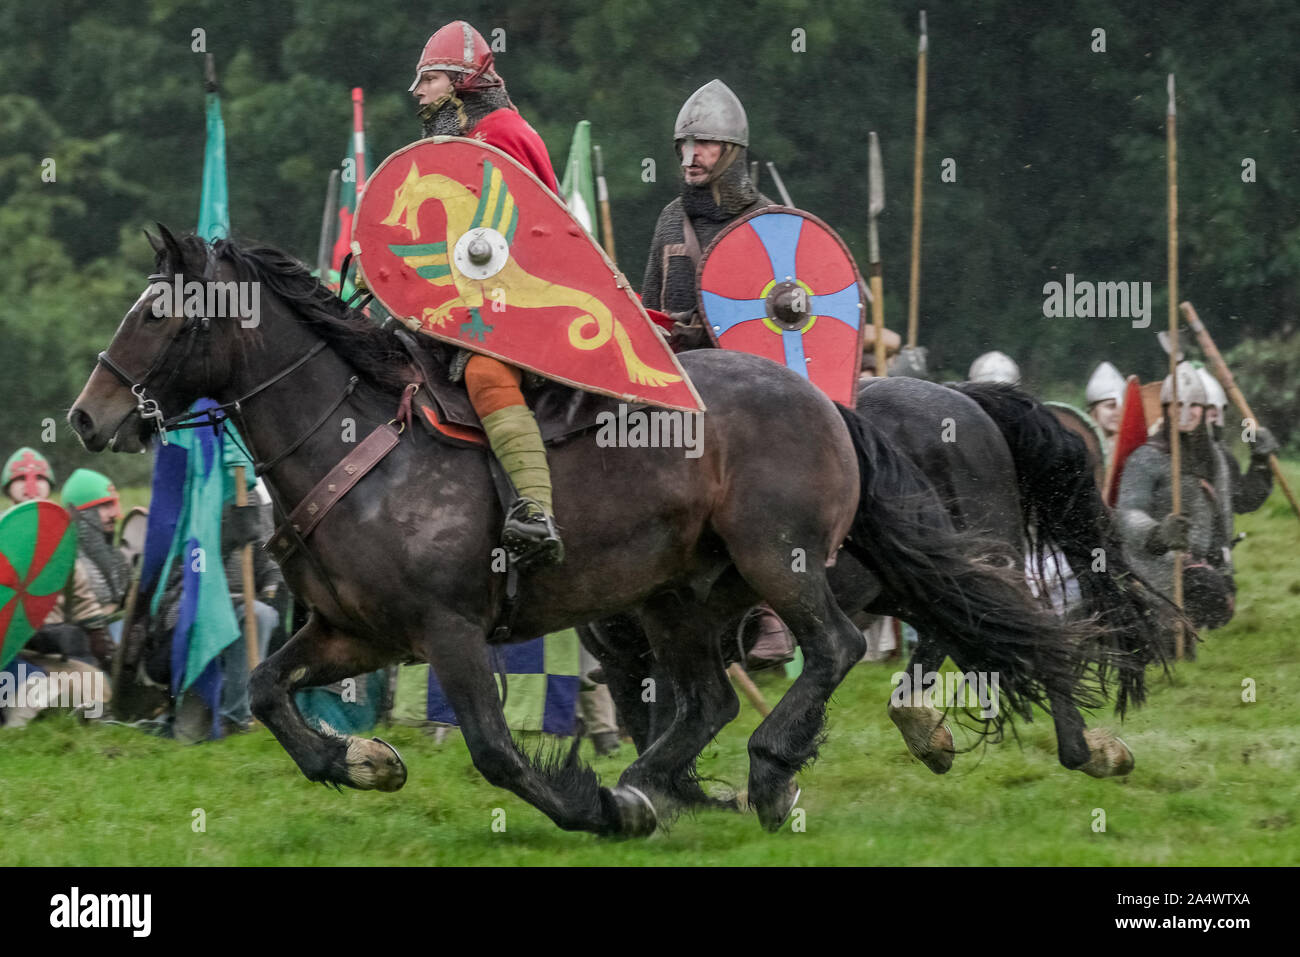 Battle of Hastings historic re-enactment at the site of the original 1066 battle between the armies of William II of Normandy and King Harold. Stock Photo